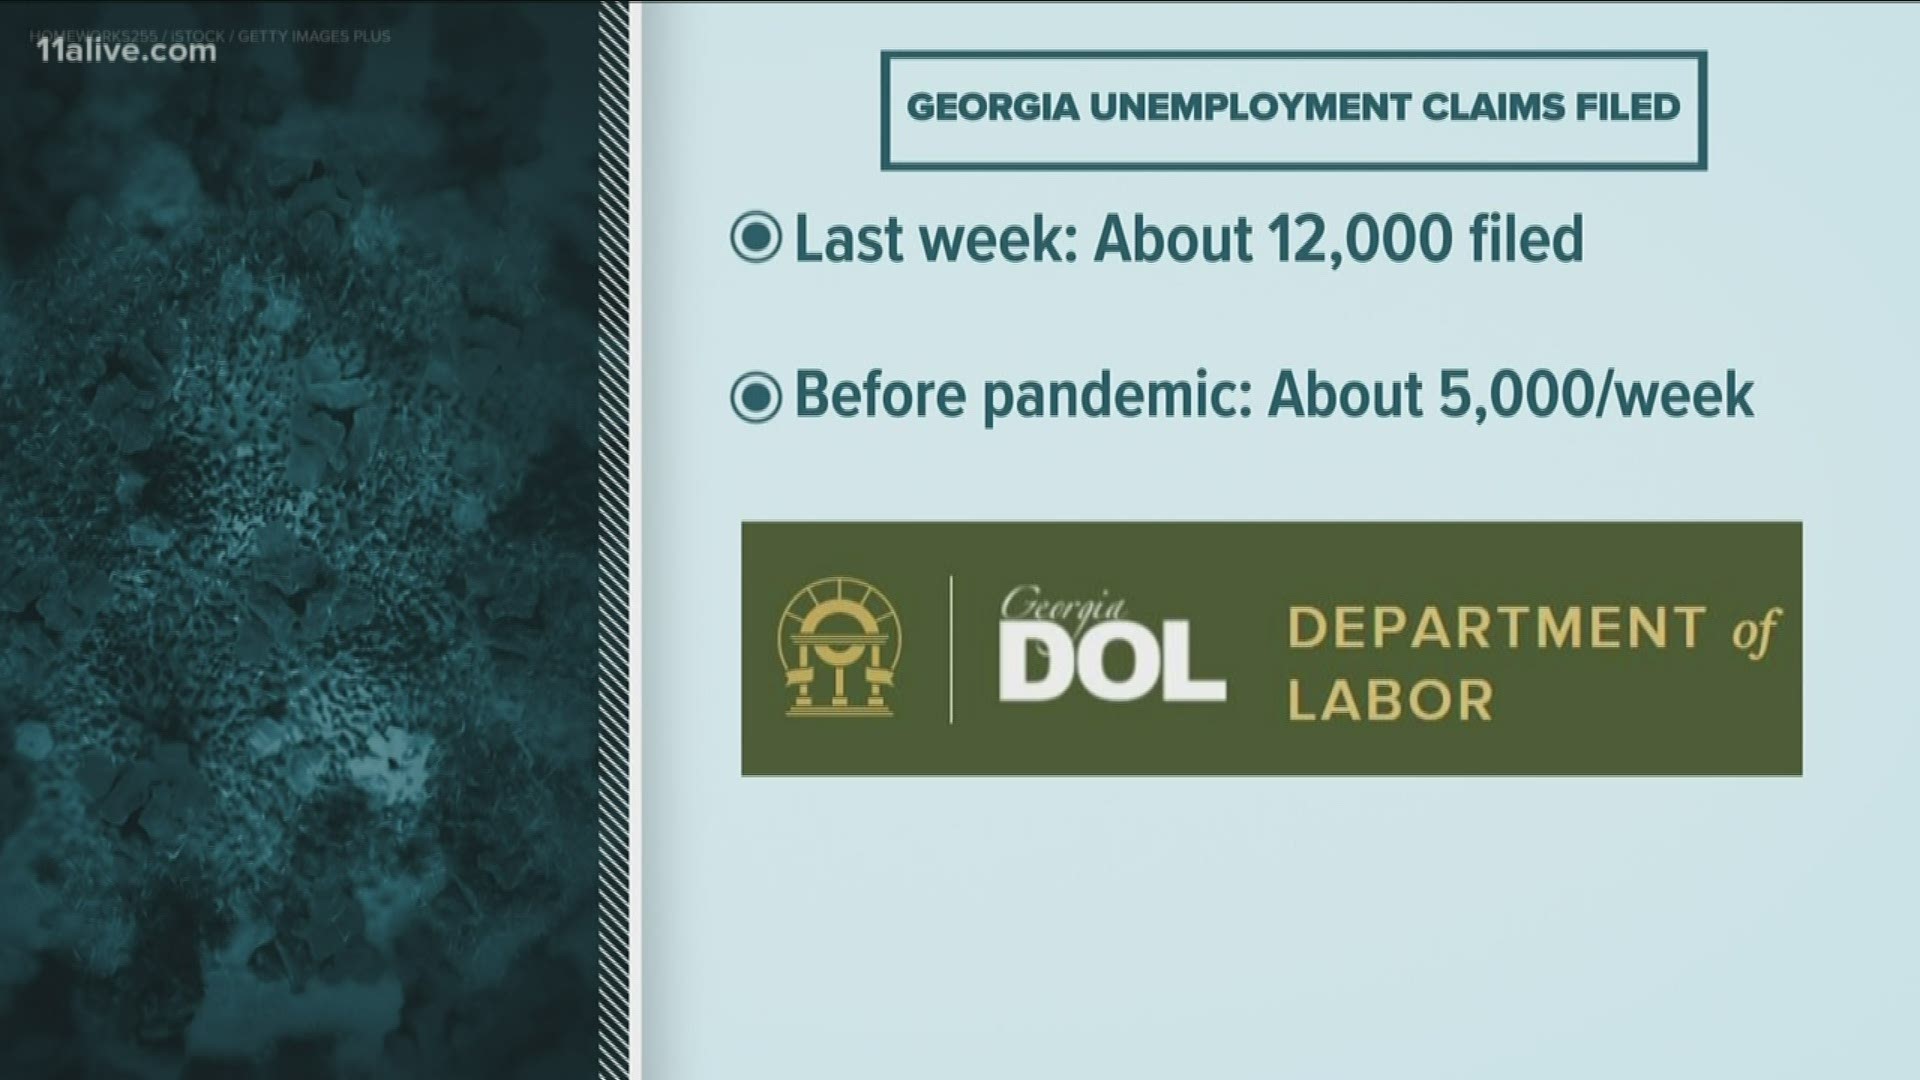 A department spokesperson said the DOL is already seeing triple the number of claims compared to the recession.